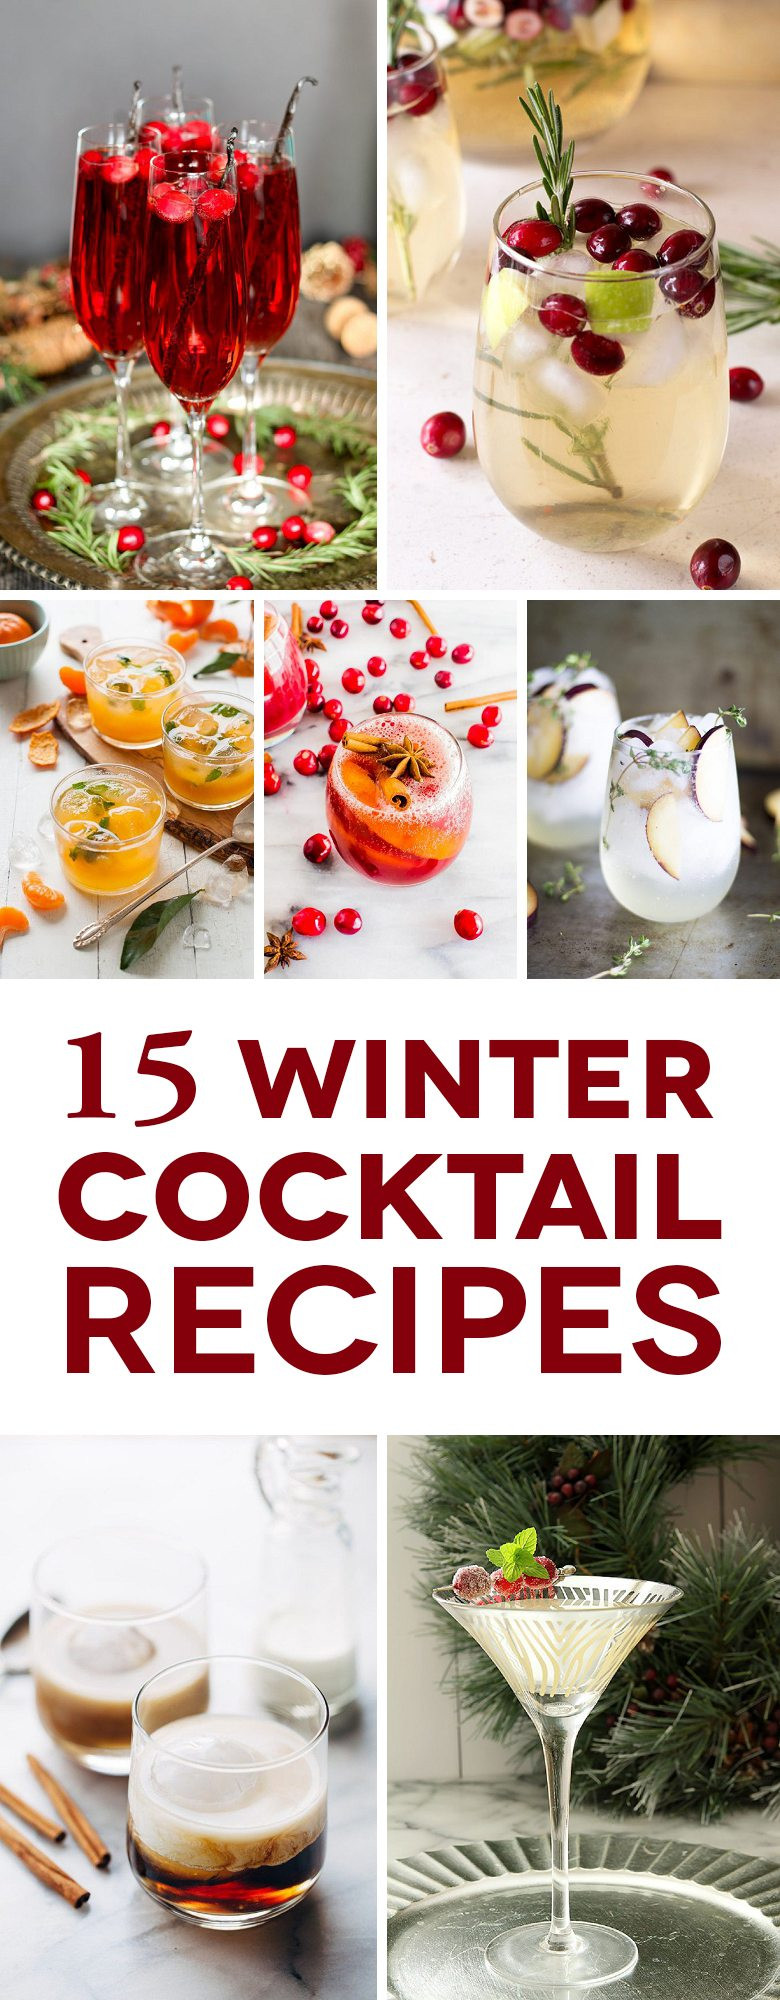 Winter Cocktails Recipe
 15 Winter Cocktails and Mocktails to Make the Season